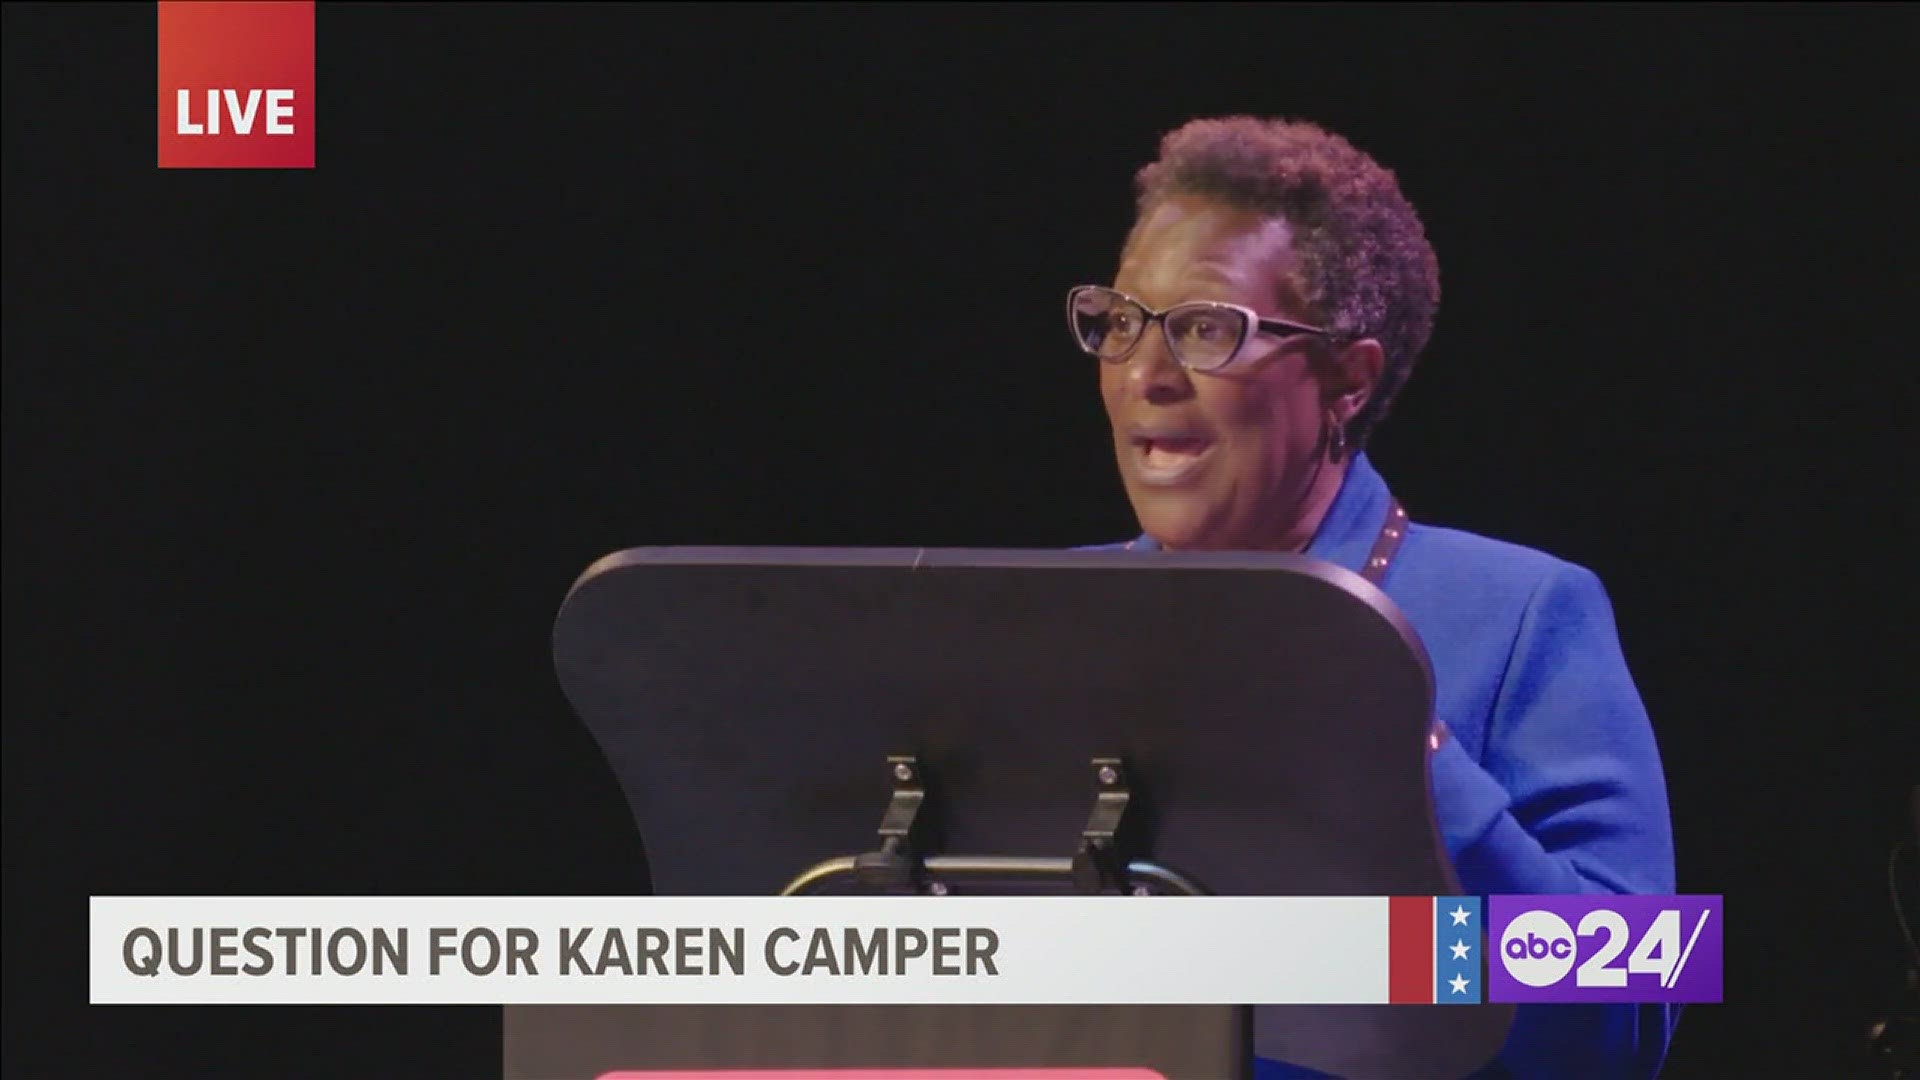 Karen Camper has held her Tennessee House Representative seat for a 15-year tenure. Now, the legislator is tossing her hat in the ring for Memphis mayor.